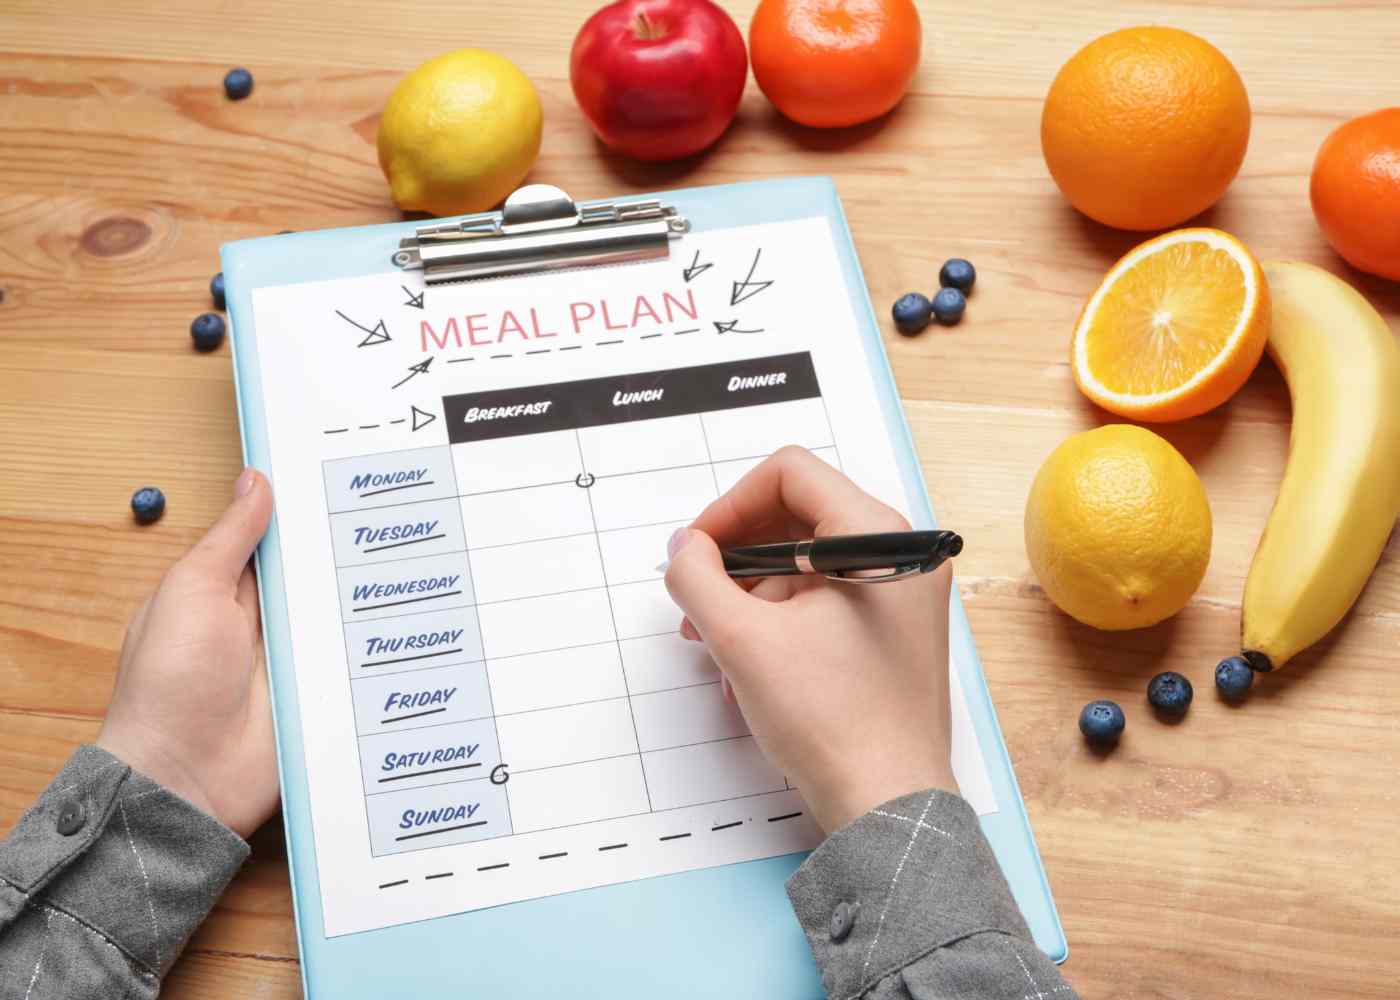 Save Money and Time with These Easy Affordable Meal Plans